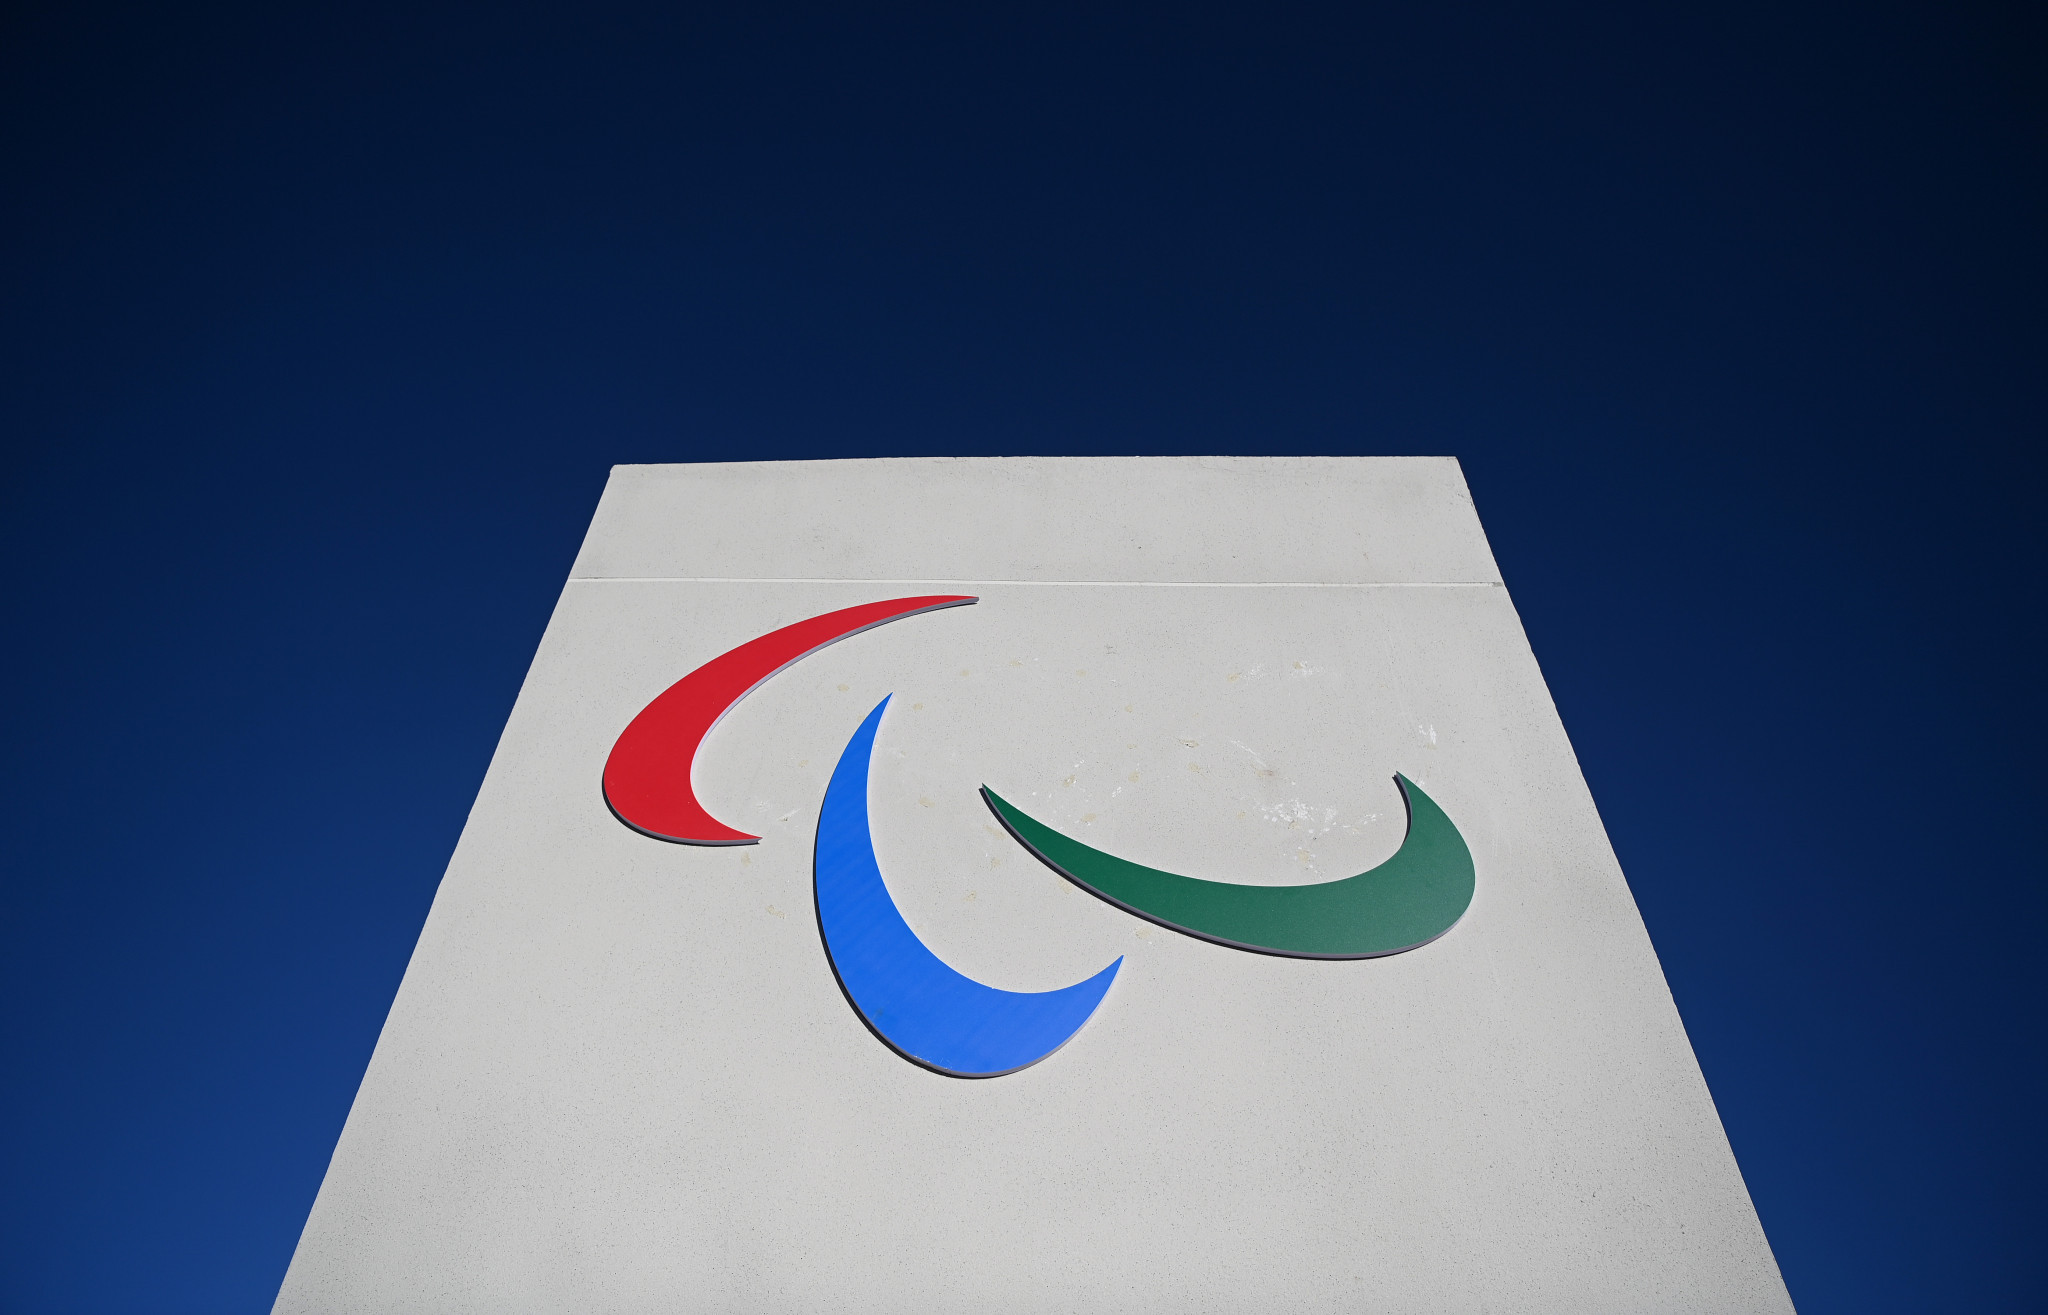 IPC begins second phase of consultation as it continues review of Classification Code